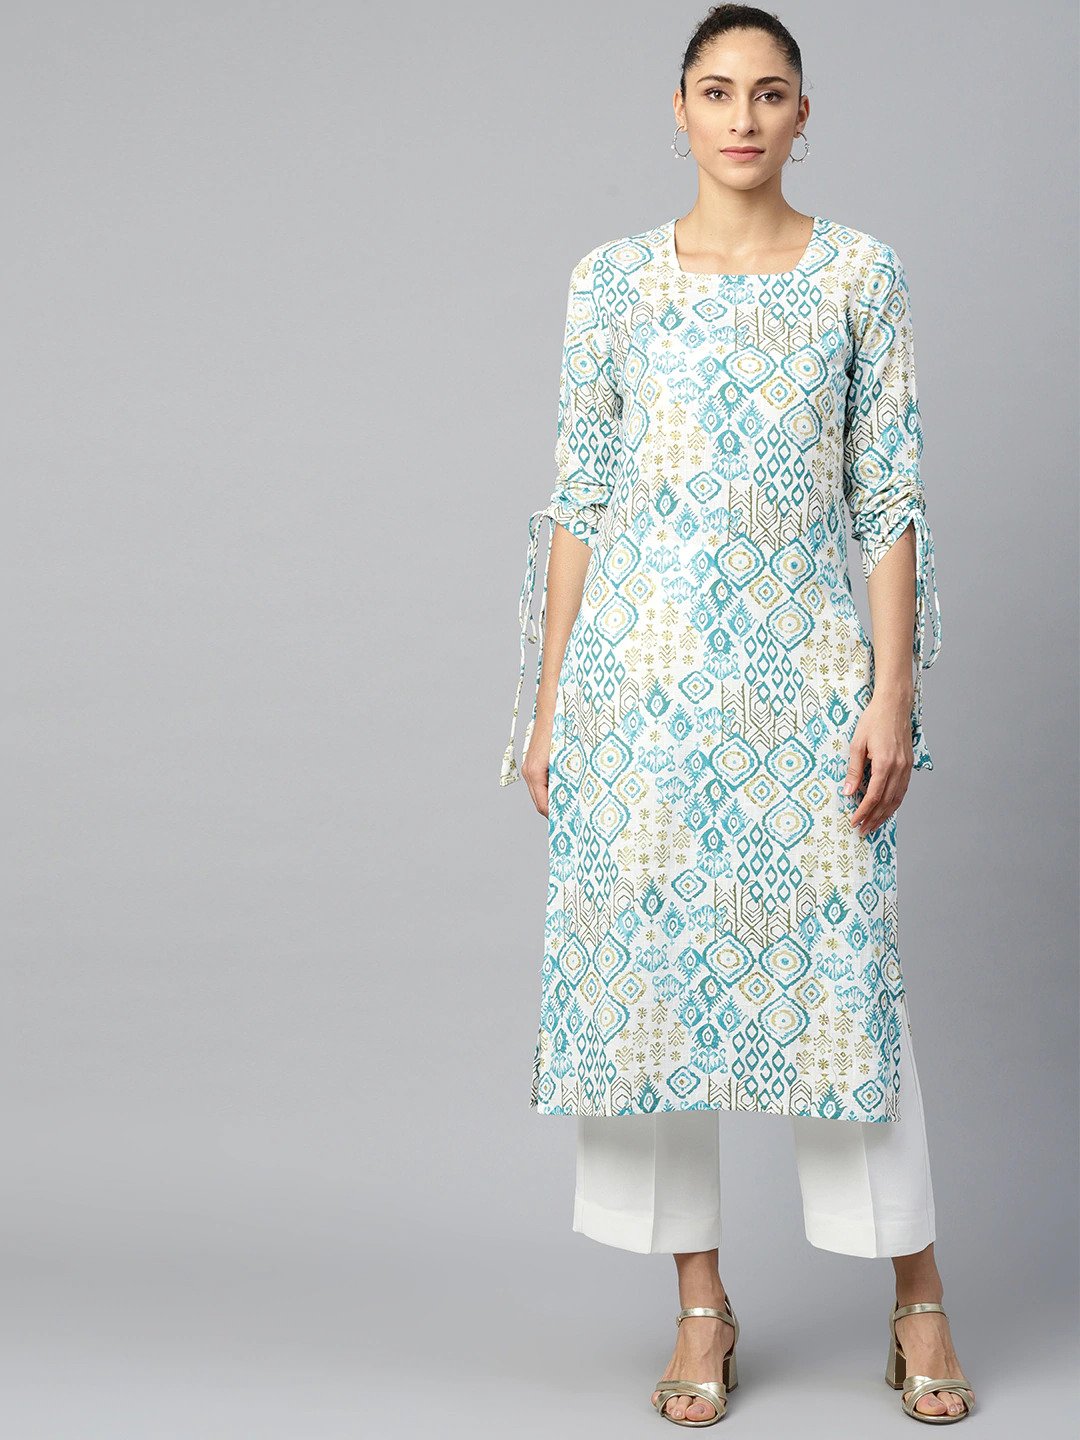 Women's White Calf Length Long Sleeves A-Line Quirky Printed Cotton Kurta - Nayo Clothing